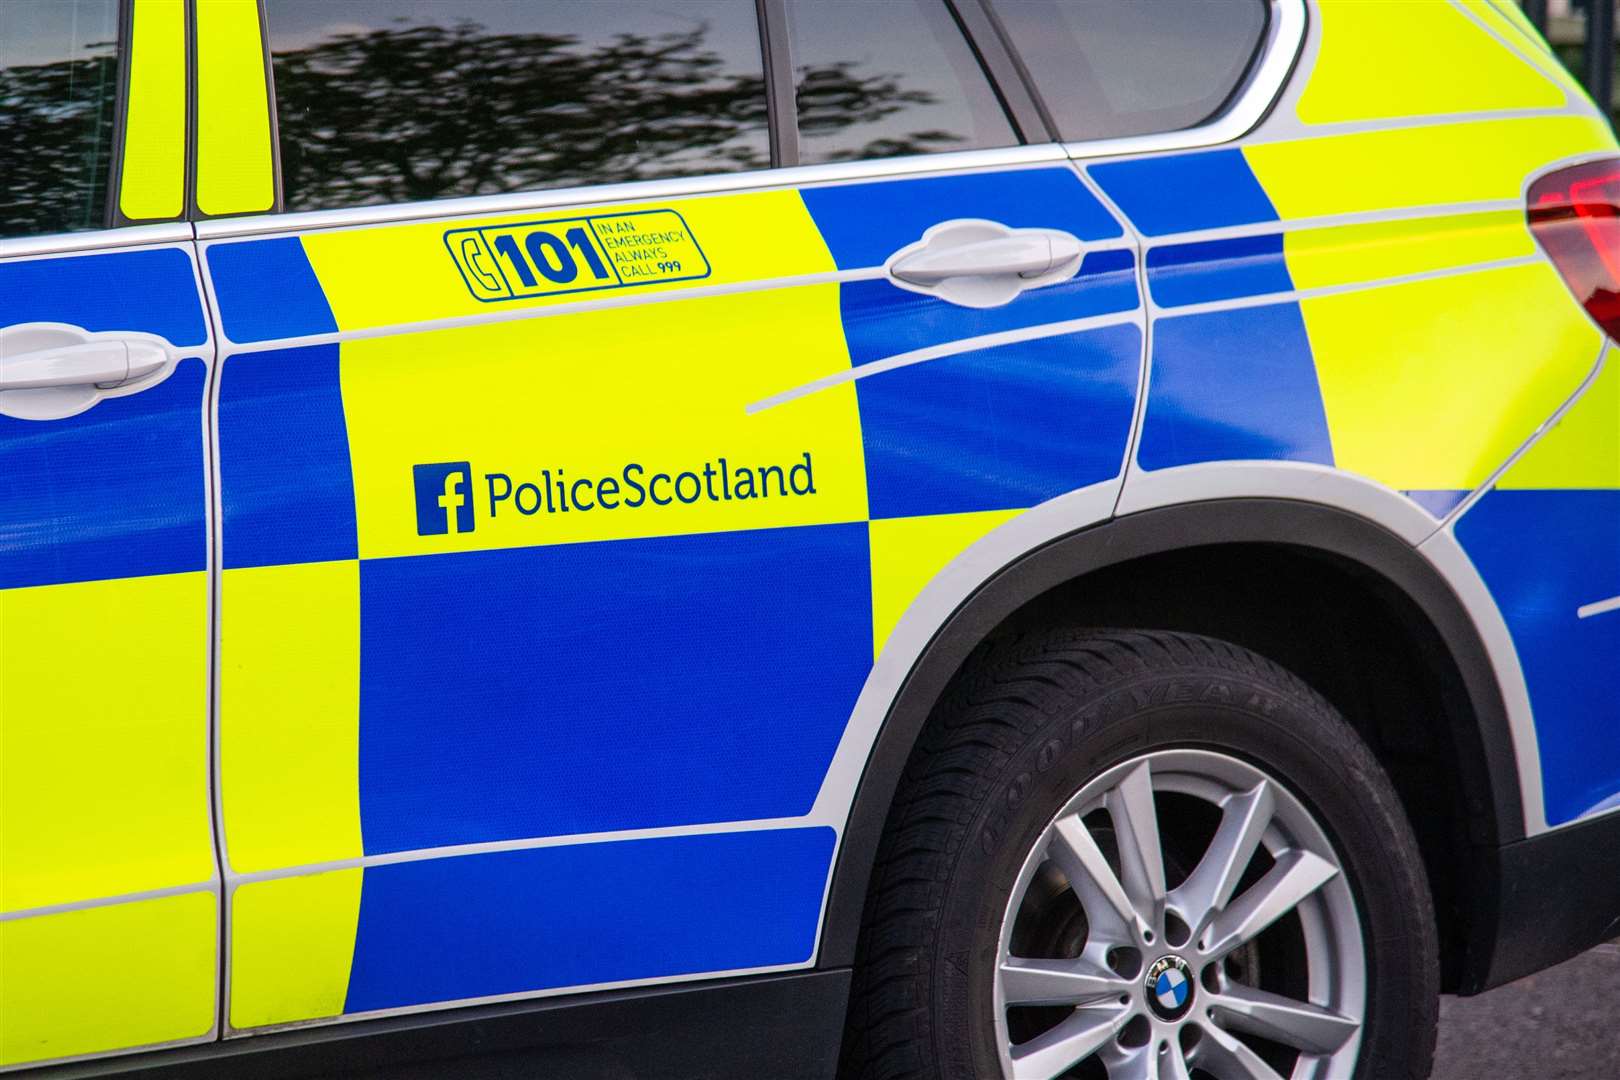 Police were called to Mackenzie and Cruickshank in Forres this morning at 8.20am.